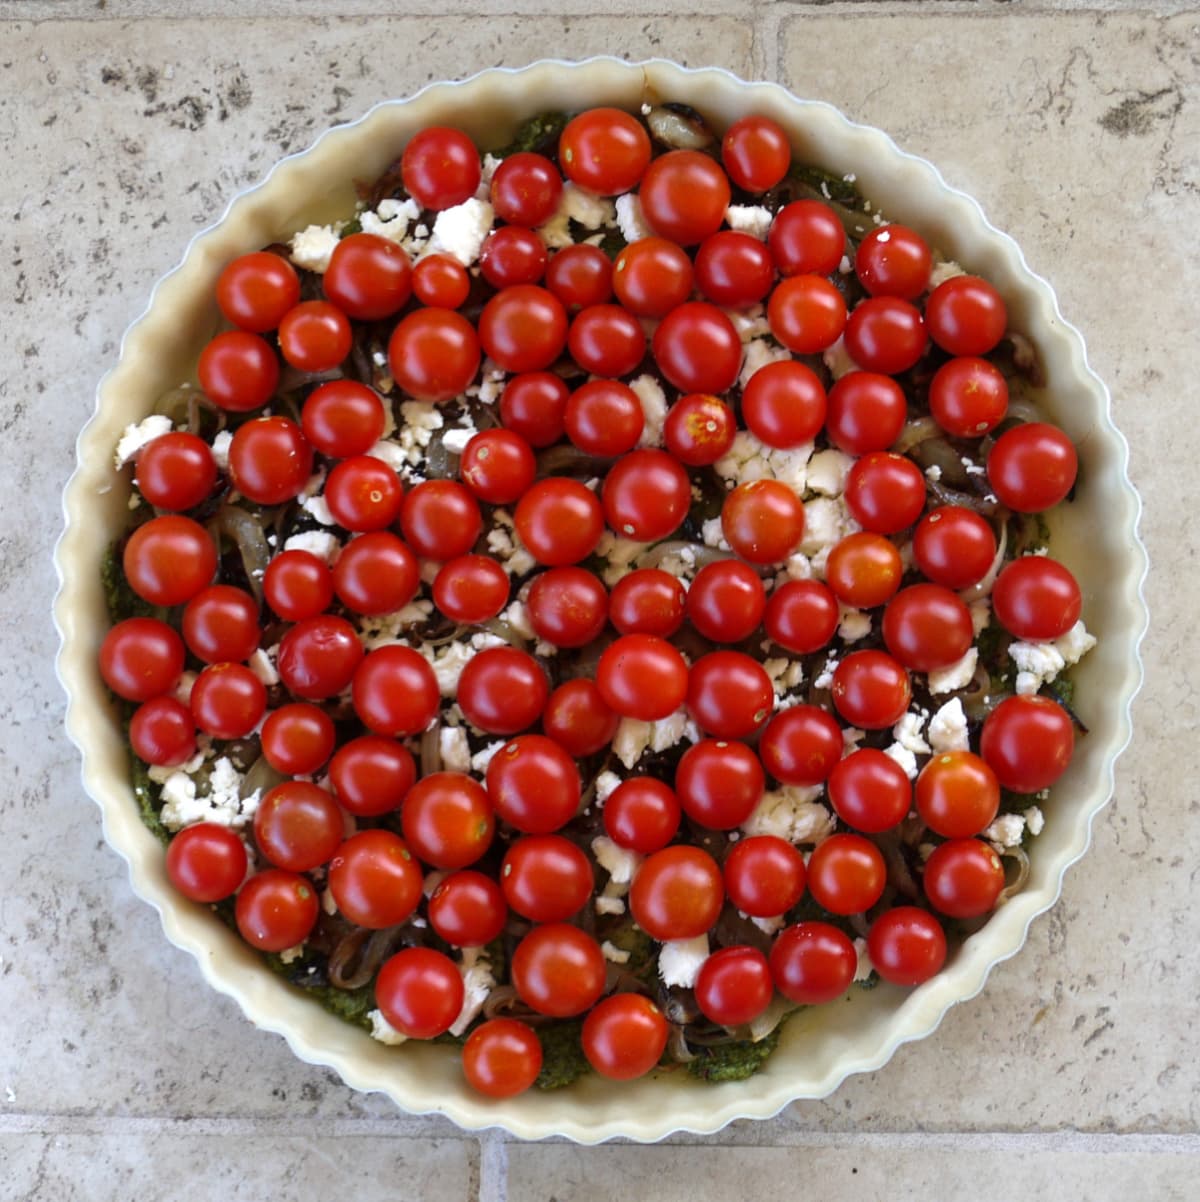 Overhead shot of cherry tomatoes covering an unbaked tart.